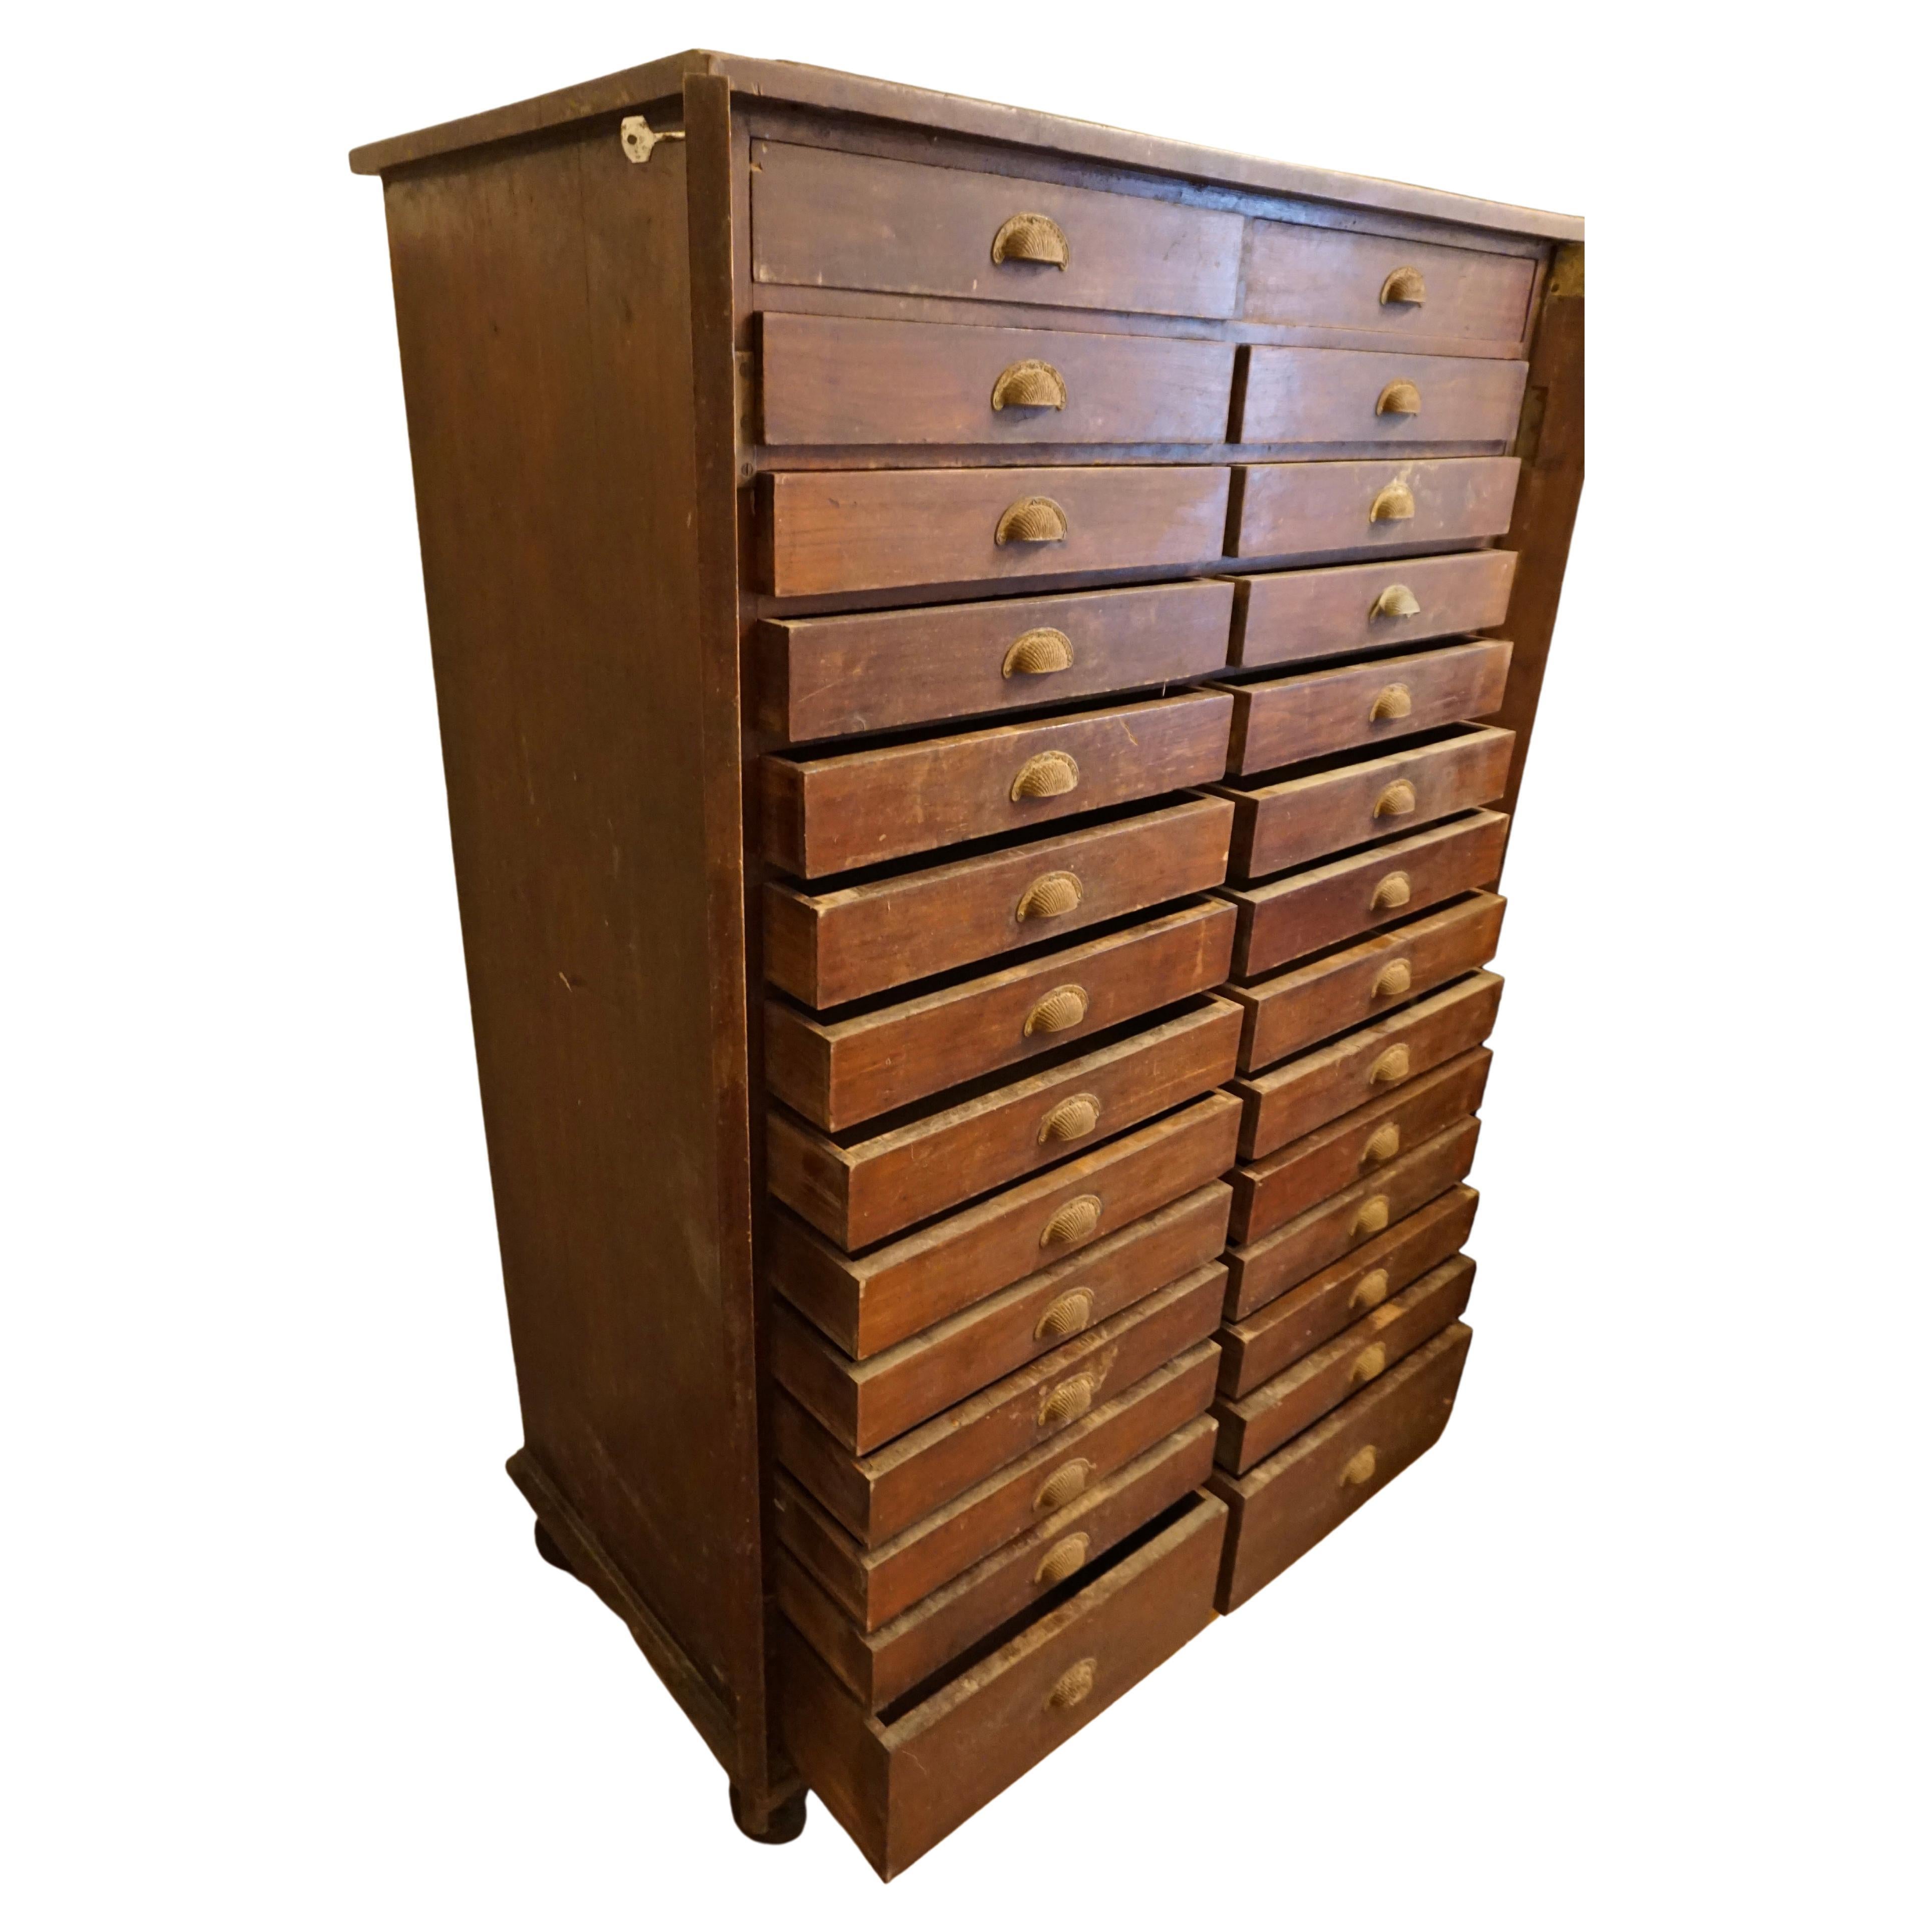 Rare solid teak multi-drawer apothecary/file cabinet with locking mechanism and hardware in original patina. Beautifully aged metal pulls. Authentic and functional conversation piece oozing character from the 